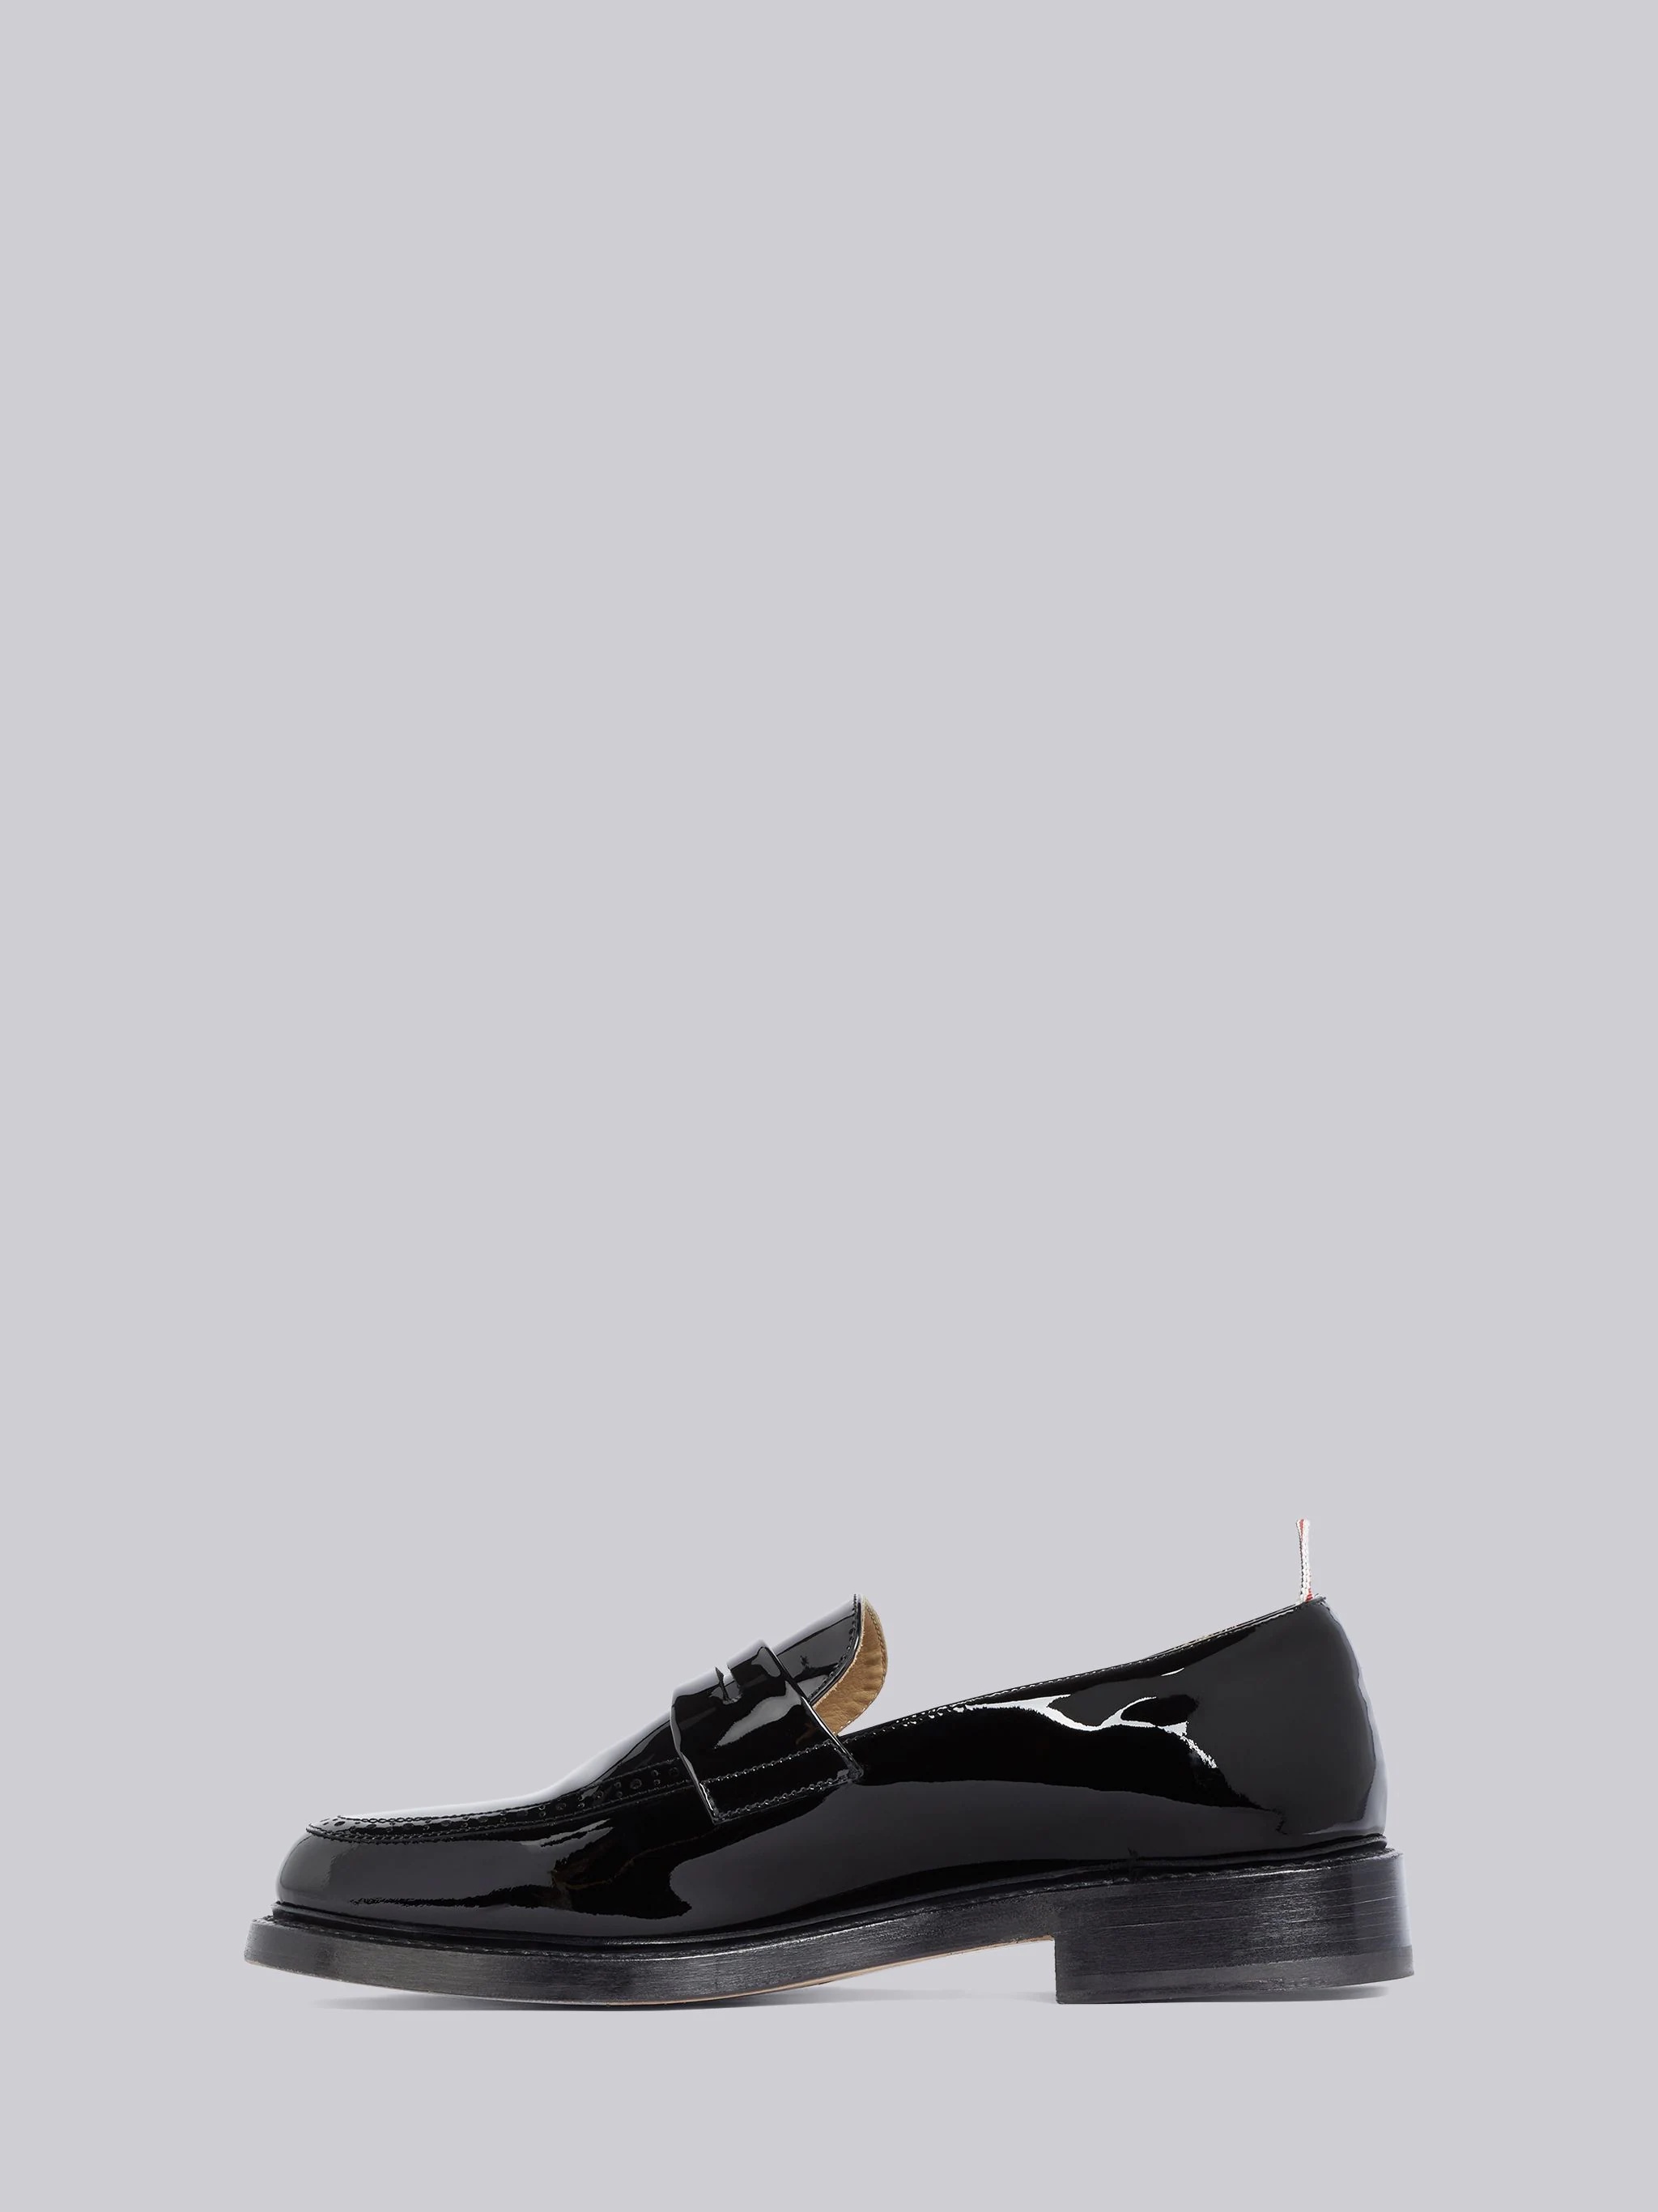 Black Patent Leather Penny Loafer - 3